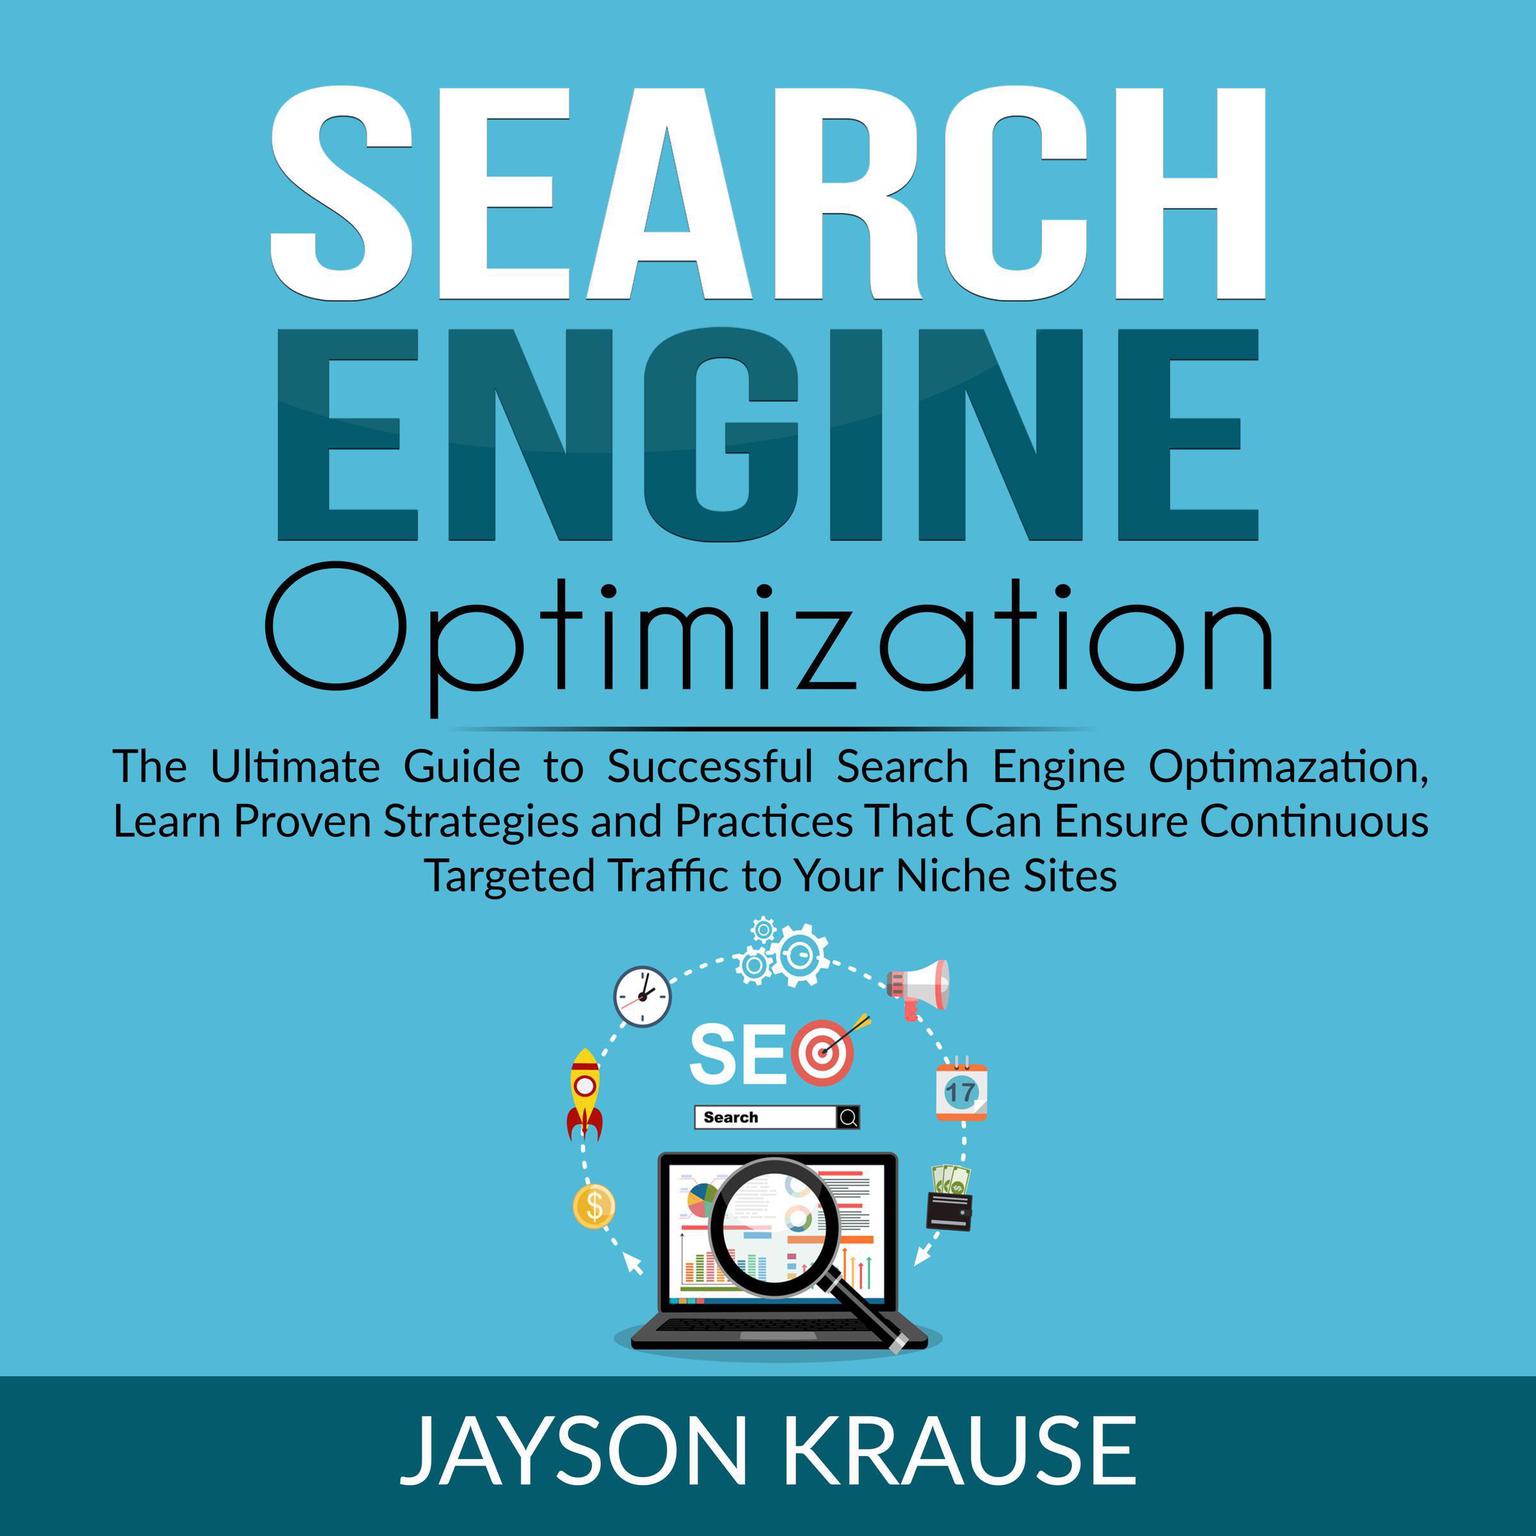 Search Engine Optimization: The Ultimate Guide to Successful Search Engine Optimization, Learn Proven Strategies and Practices That Can Ensure Continuous Targeted Traffic to Your Niche Site Audiobook, by Jayson Krause